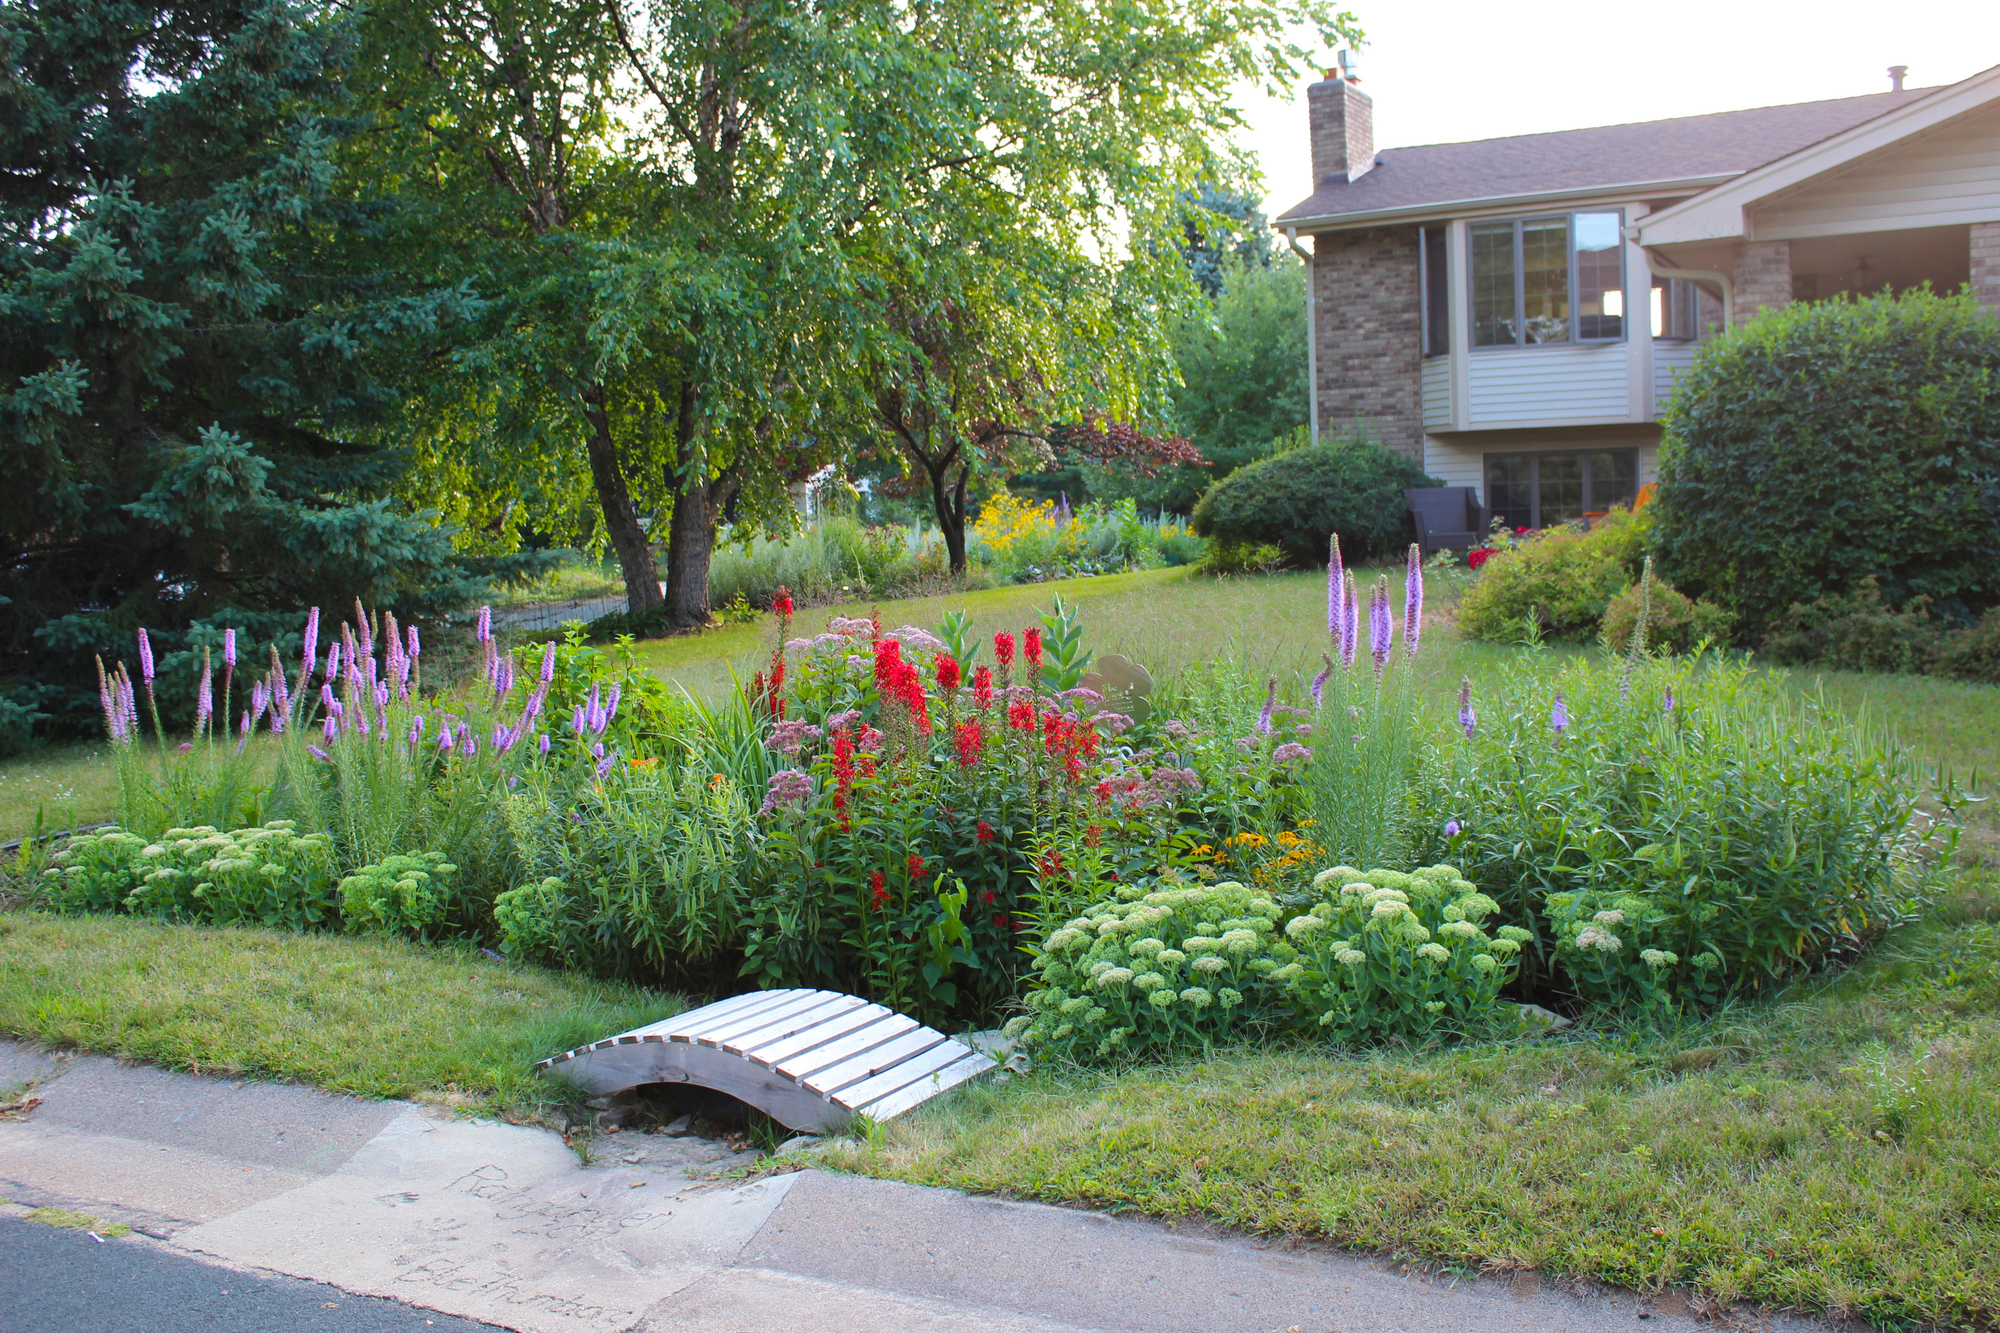 Grants available to help residents install raingardens